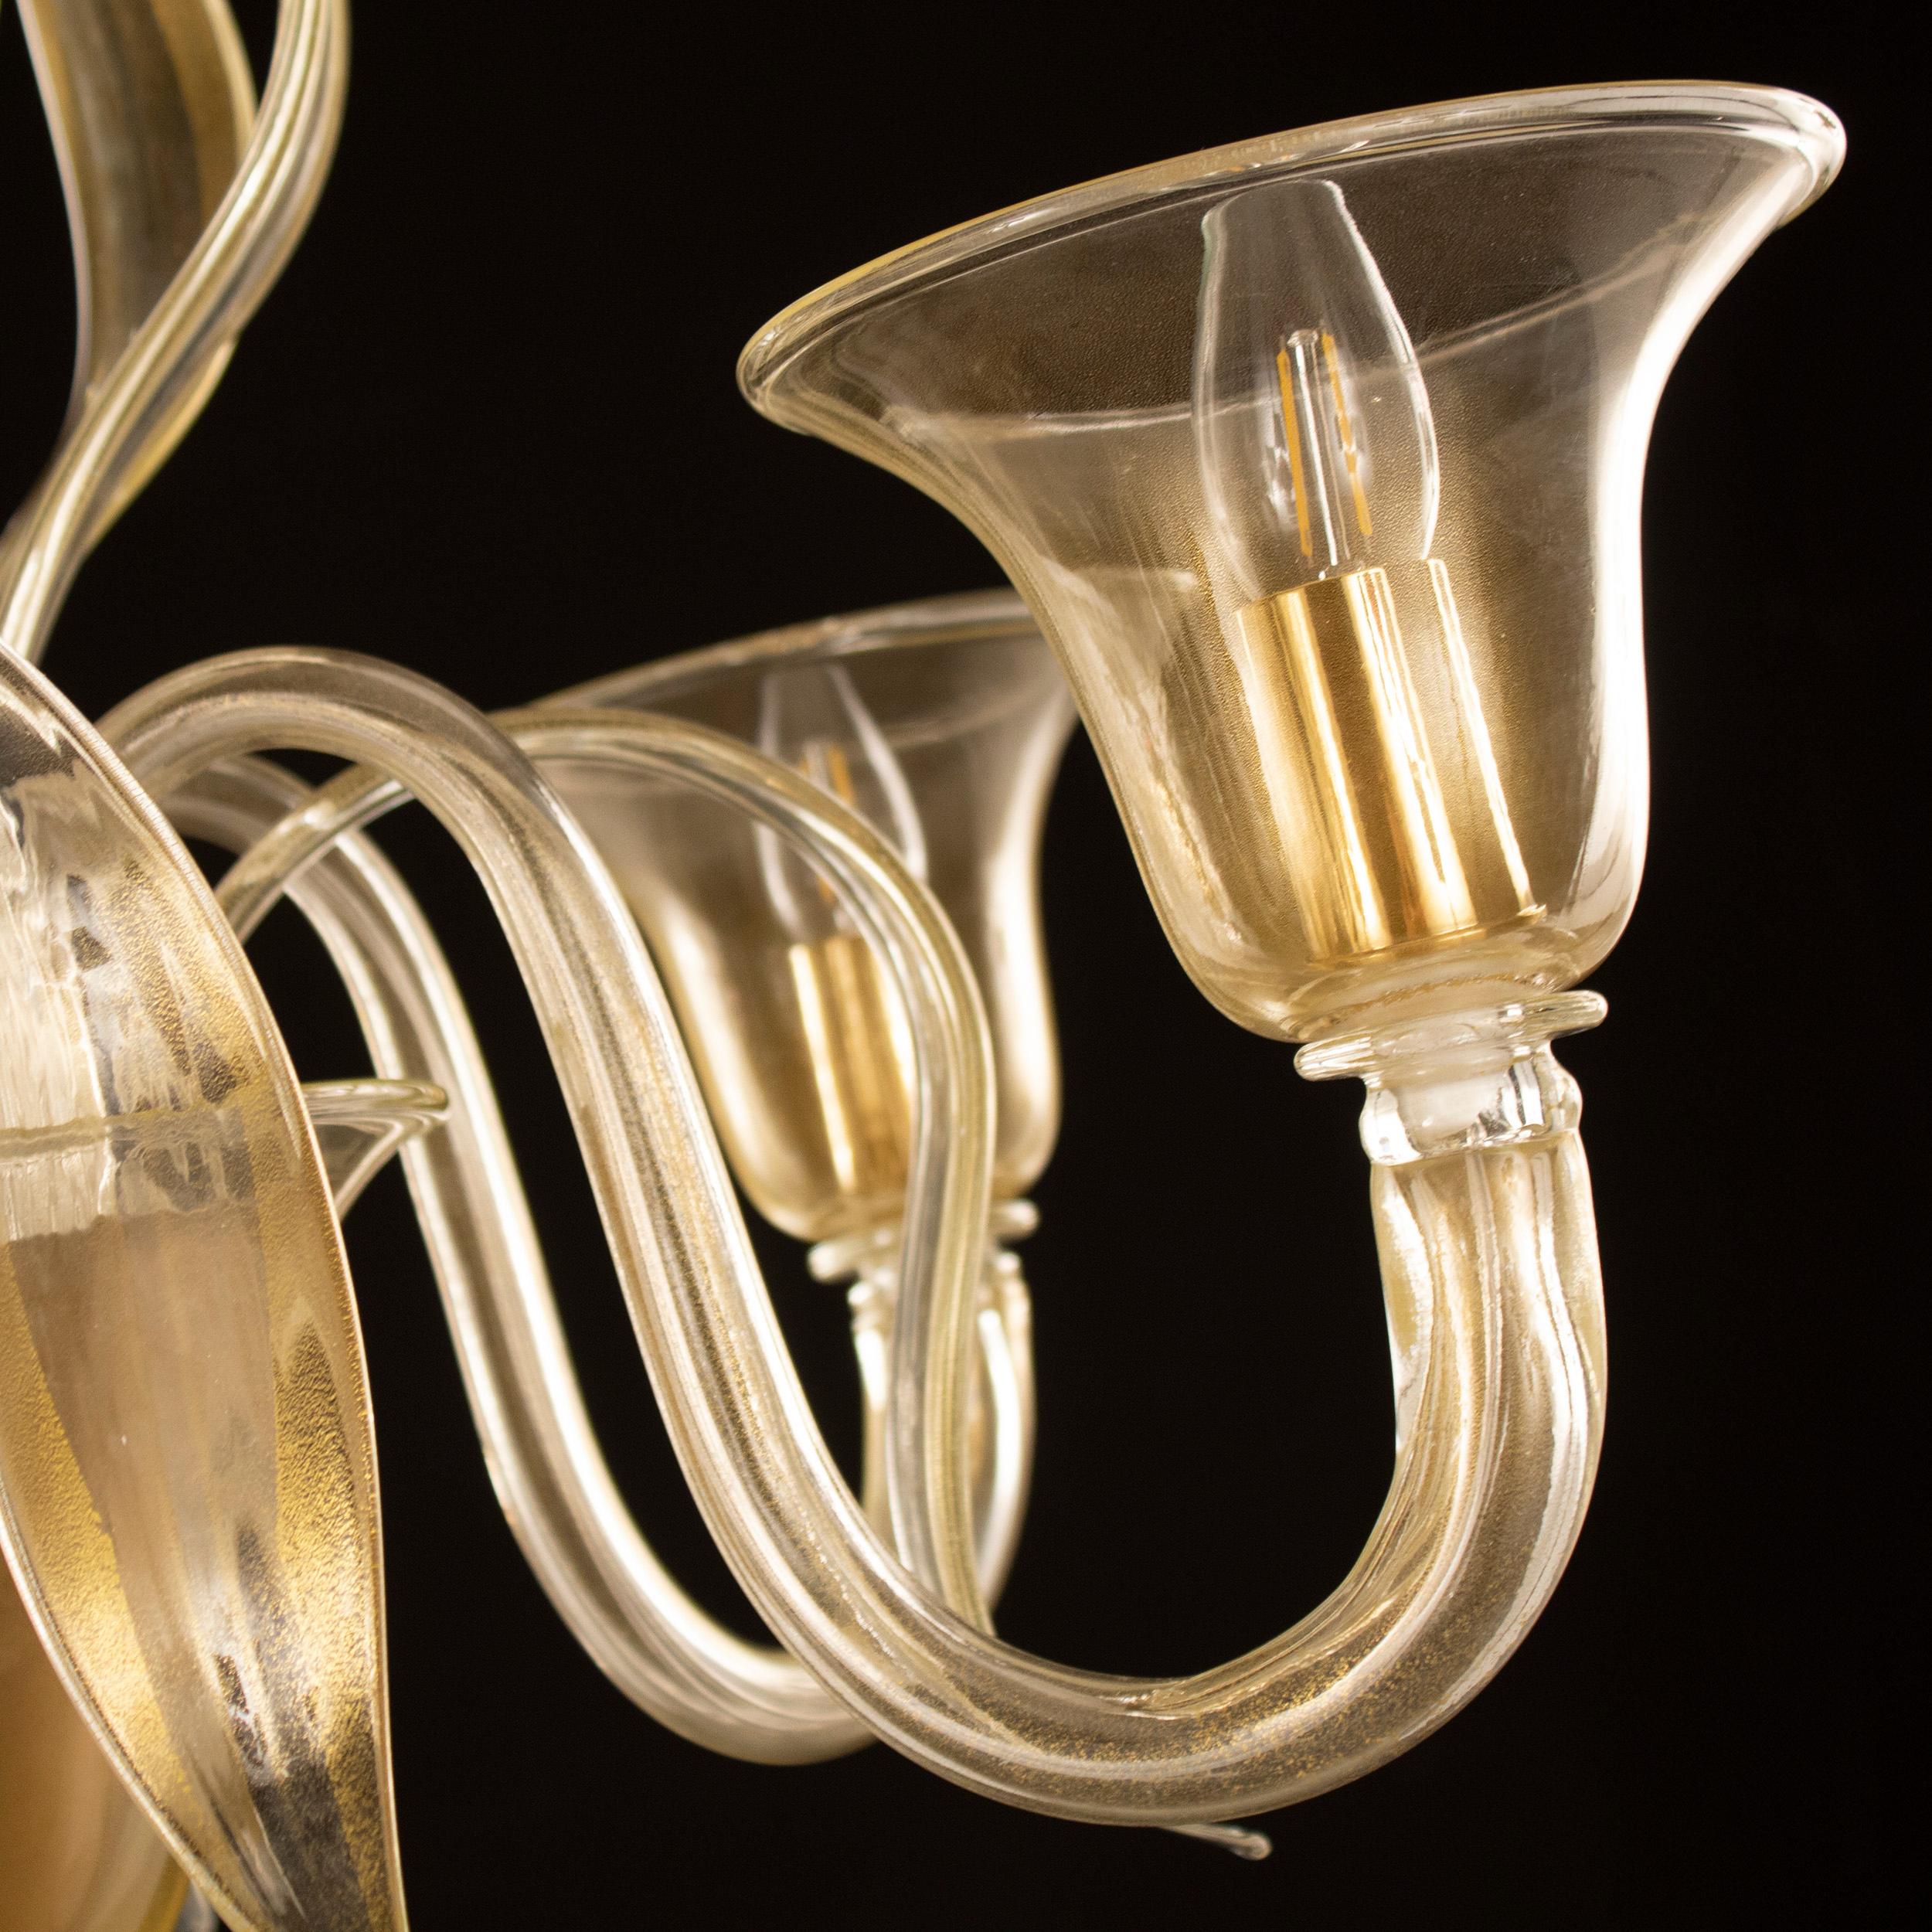 Swing 275 chandelier, 5 upwards lights, gold Murano glass by Multiforme. 
The collection of Murano glass chandeliers Swing 275 is one of our collections that most differs from the Classic Murano tradition: the design of this collection is closer to